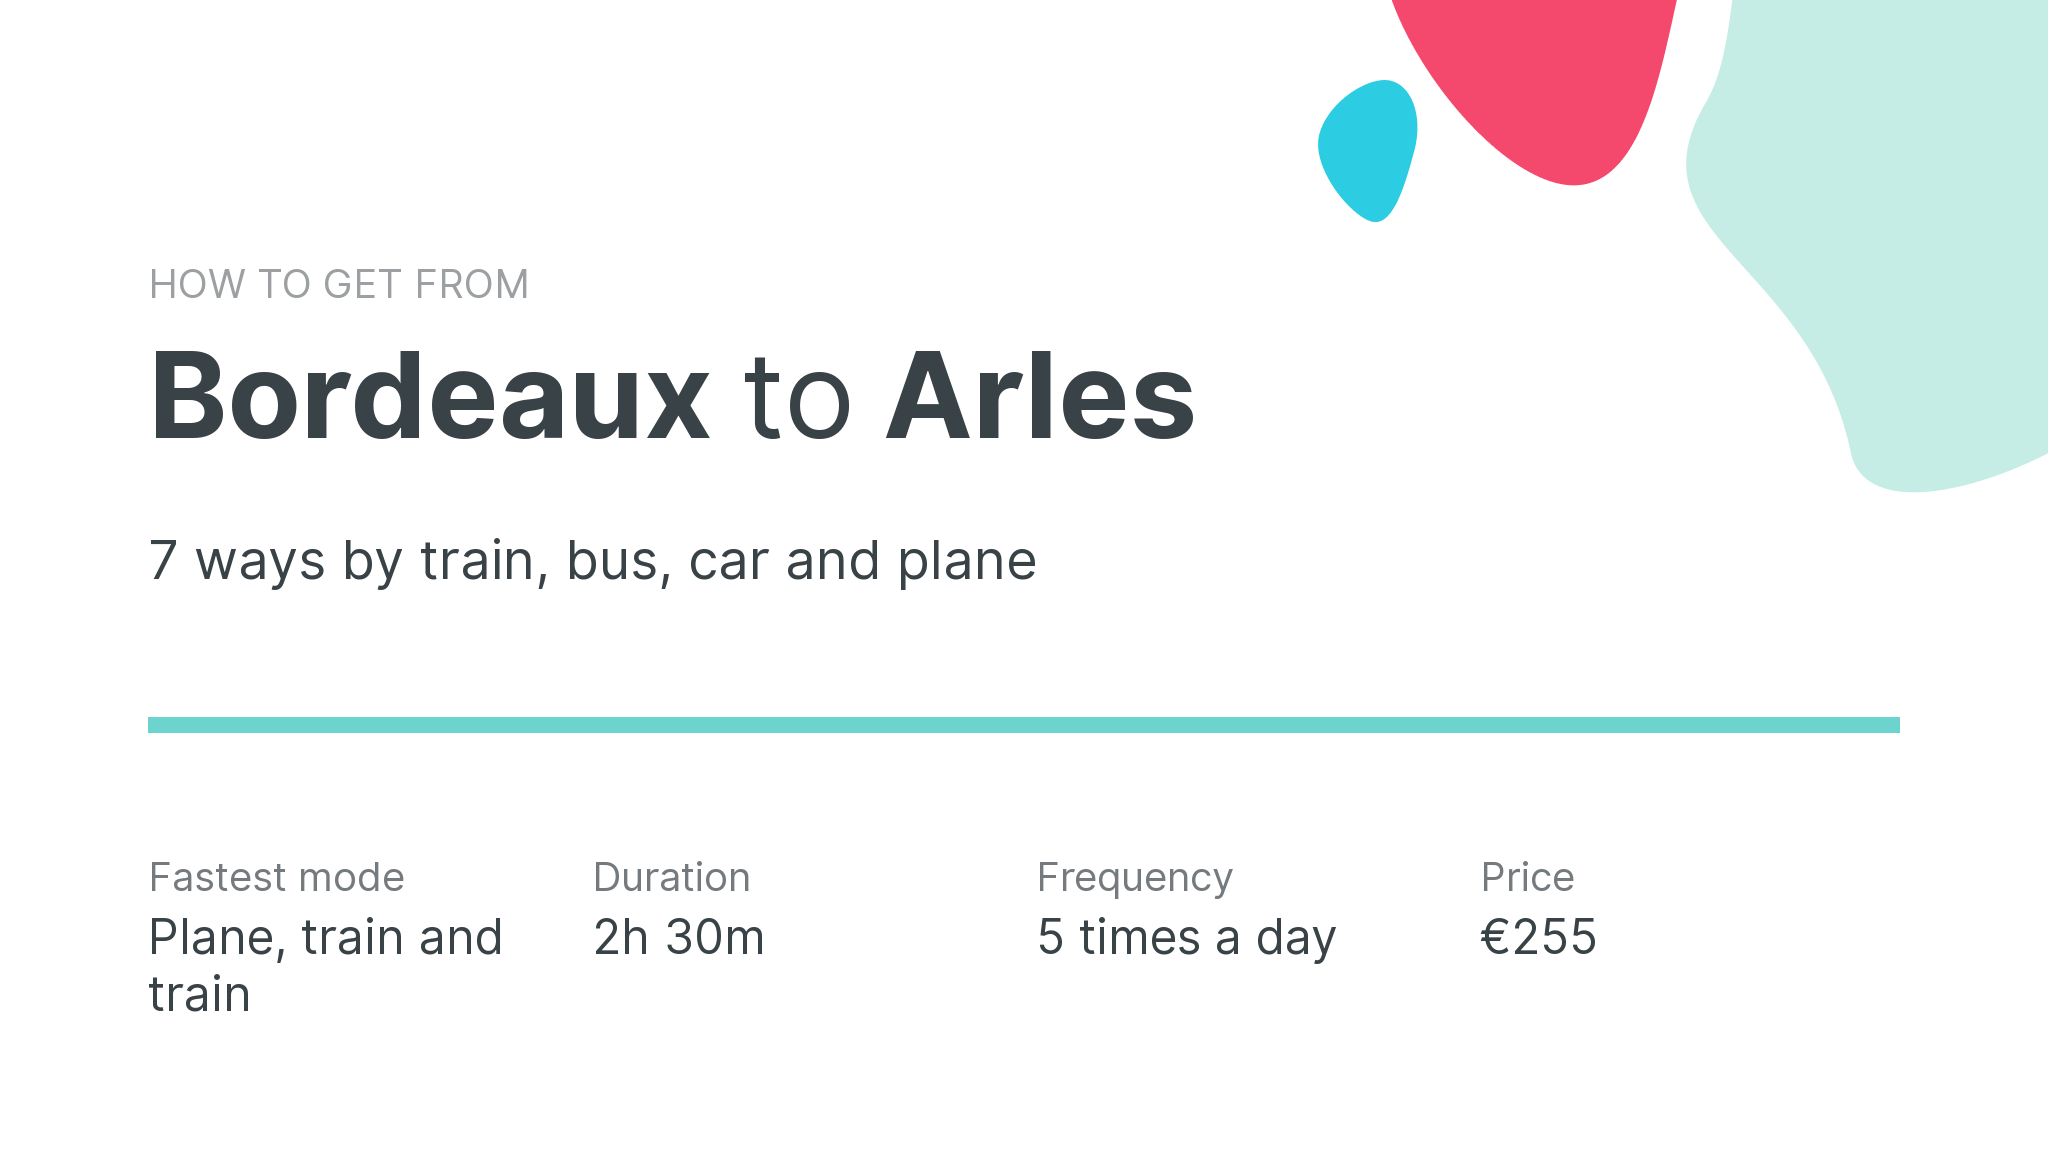 How do I get from Bordeaux to Arles